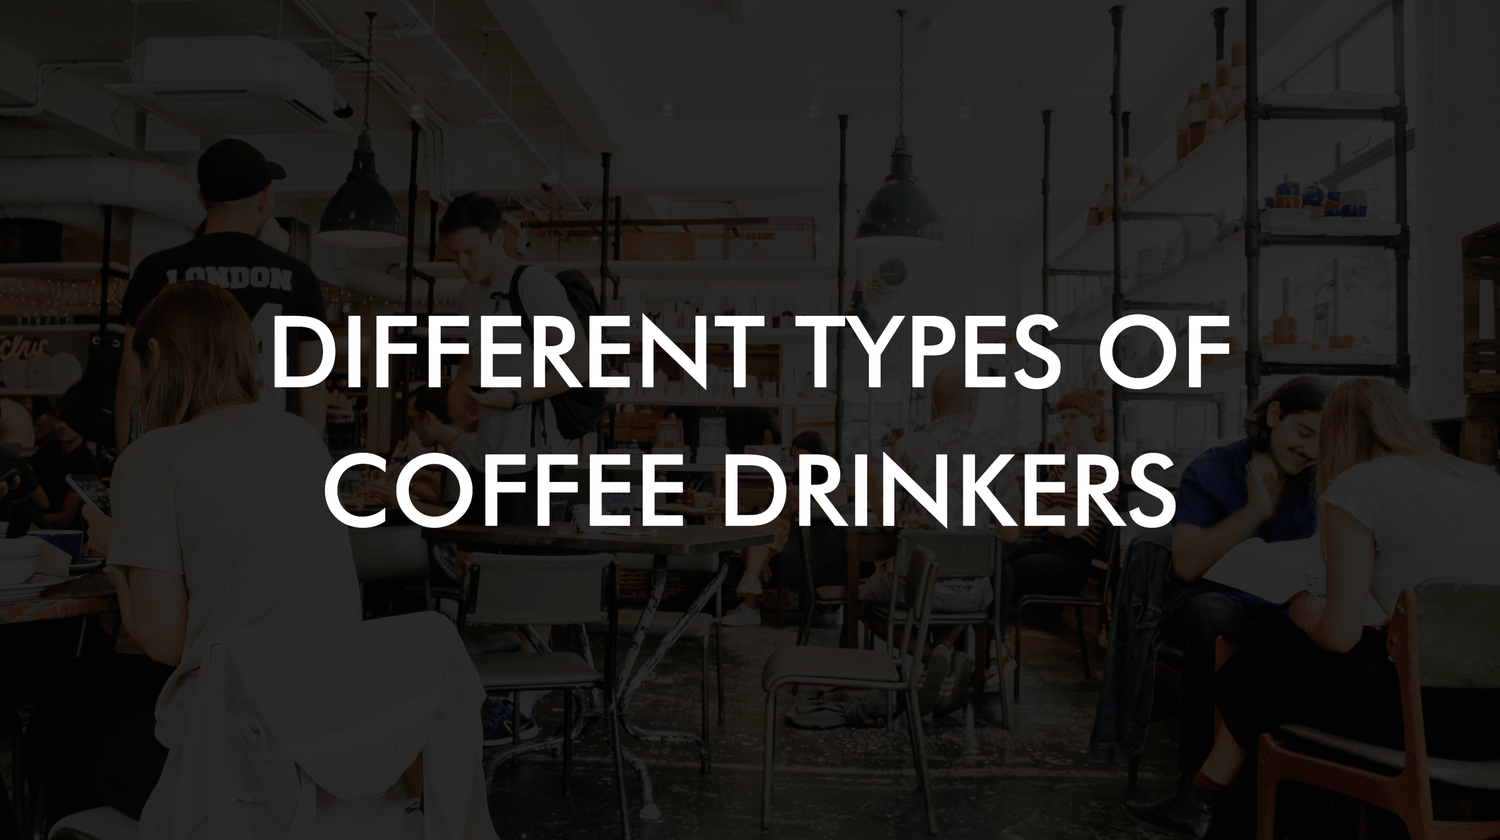 The Different Types Of Coffee Drinkers